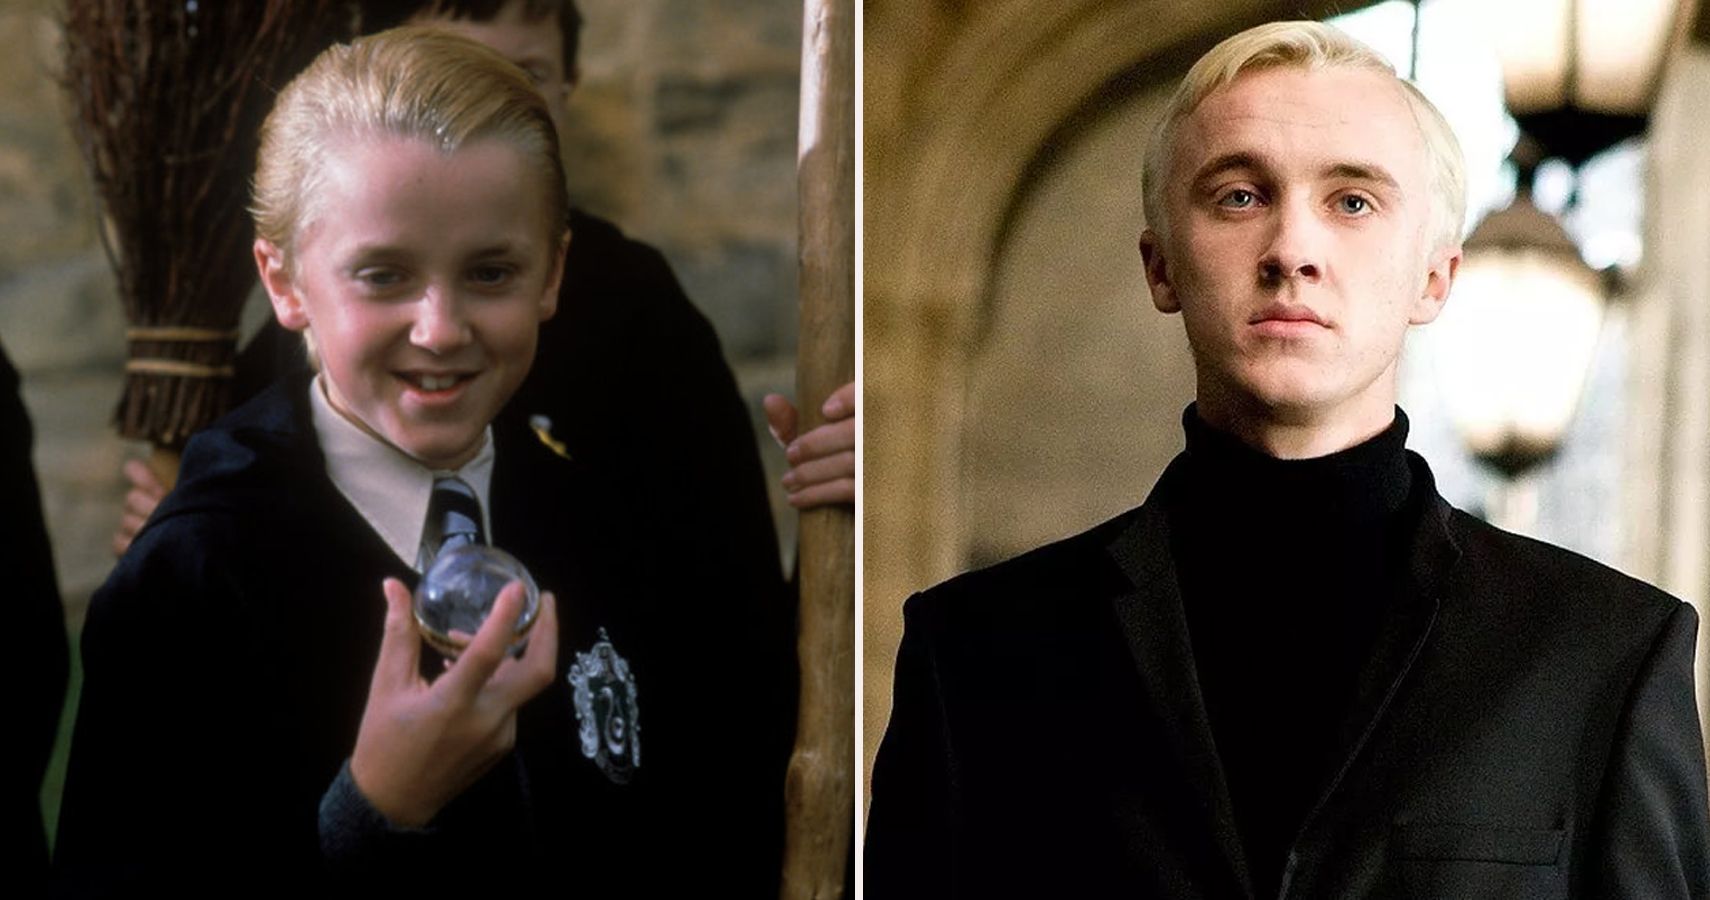 https://static1.srcdn.com/wordpress/wp-content/uploads/2019/06/10-Times-Draco-Malfoy-Should-Have-Been-Expelled-Or-Sent-To-Azkaban-featured-image.jpg